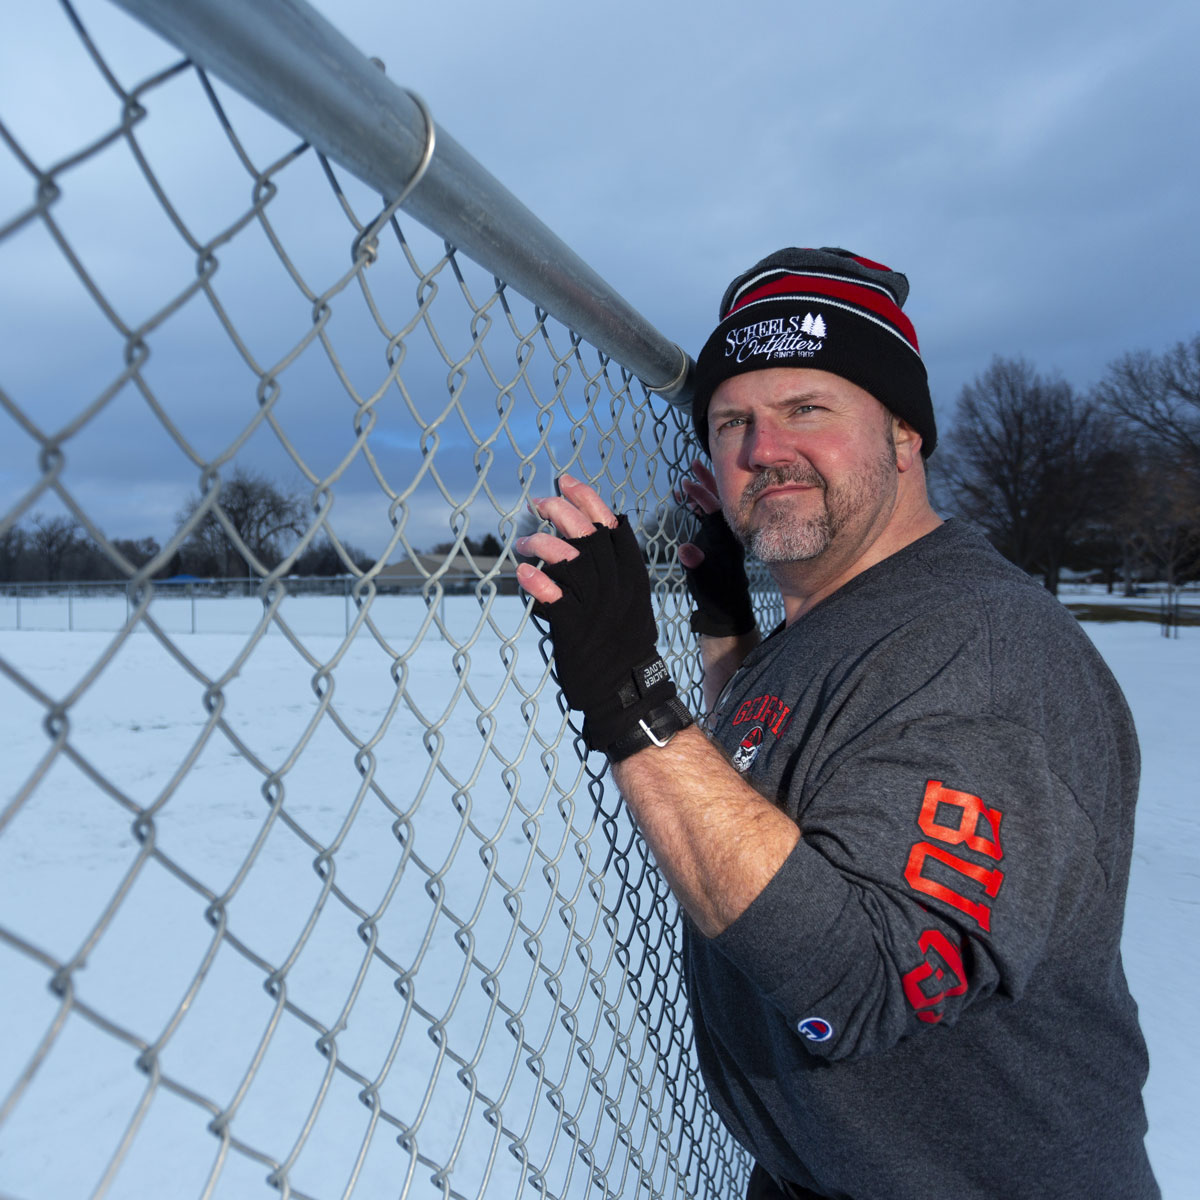 in this photo a chain linke fence leads from left to right to the subject placed in the right third of the image. The snow covered background has a cool blue tint while the subject is lit with a warmer colored flash.